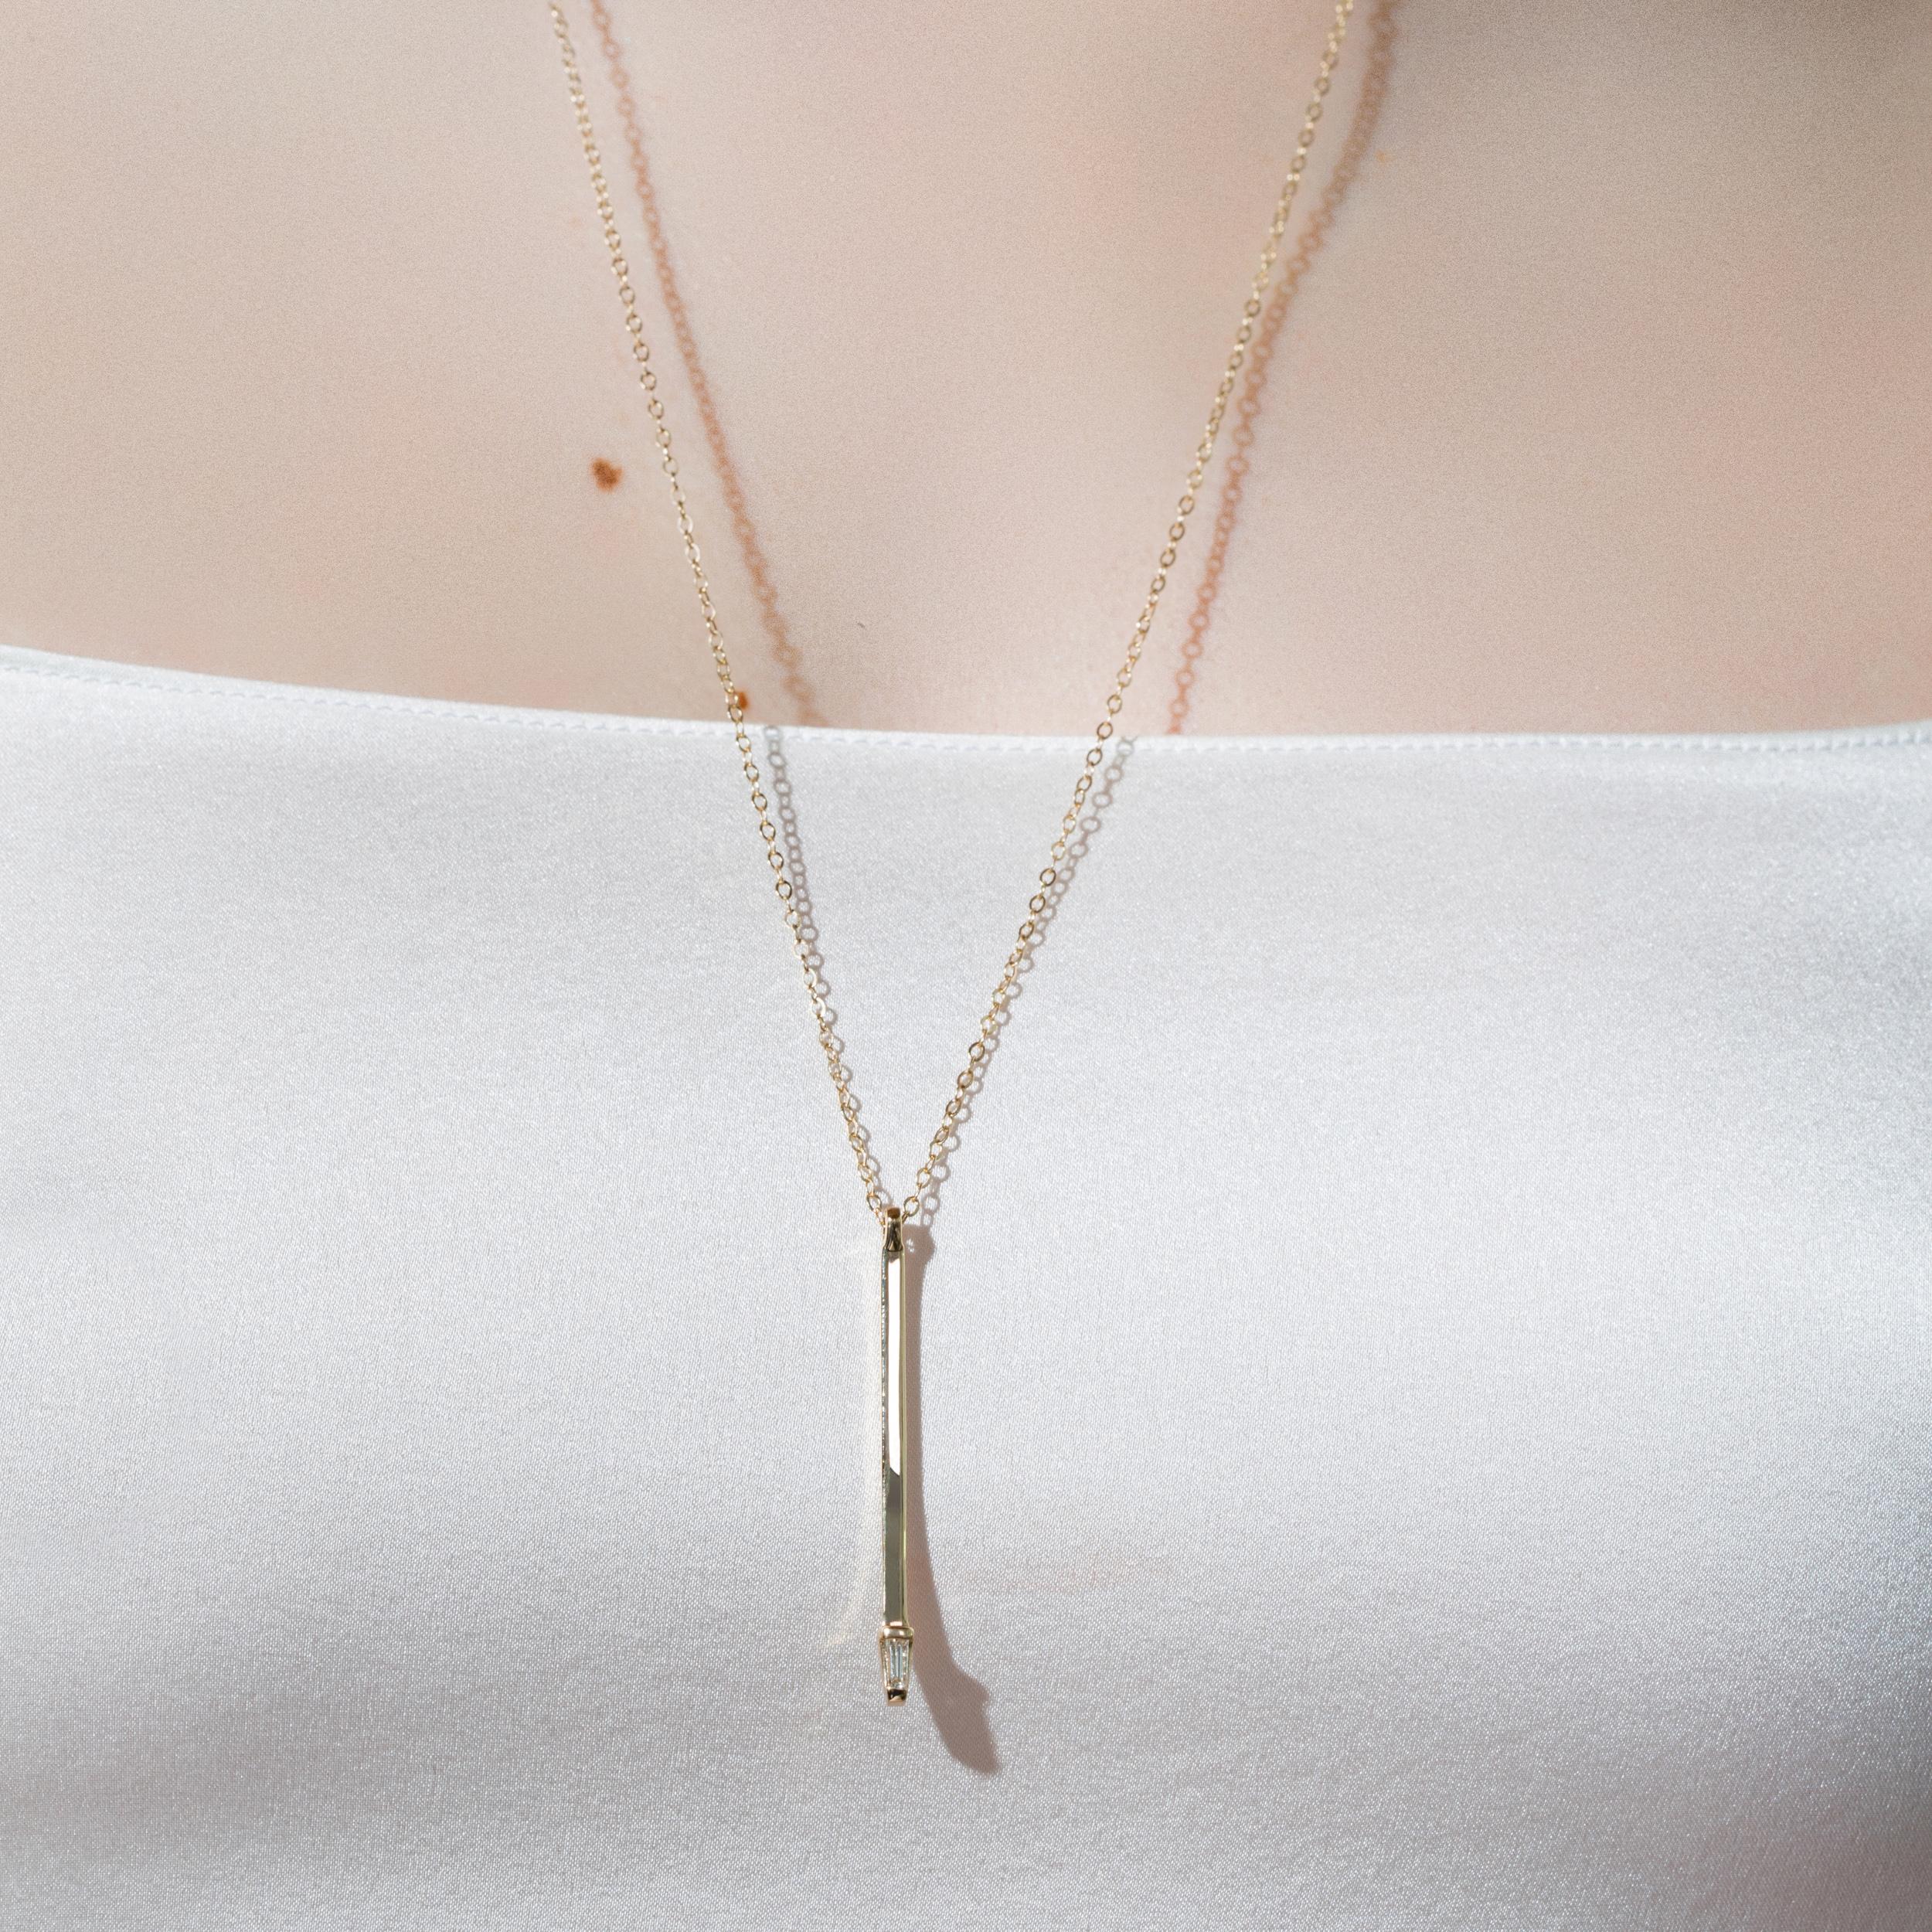 The Landmark Series celebrates love in NYC. Inspired by the structural boldness of iconic New York architecture, the collection captures the essence of Gotham. An everyday staple this necklace features one single tapered baguette designed with the